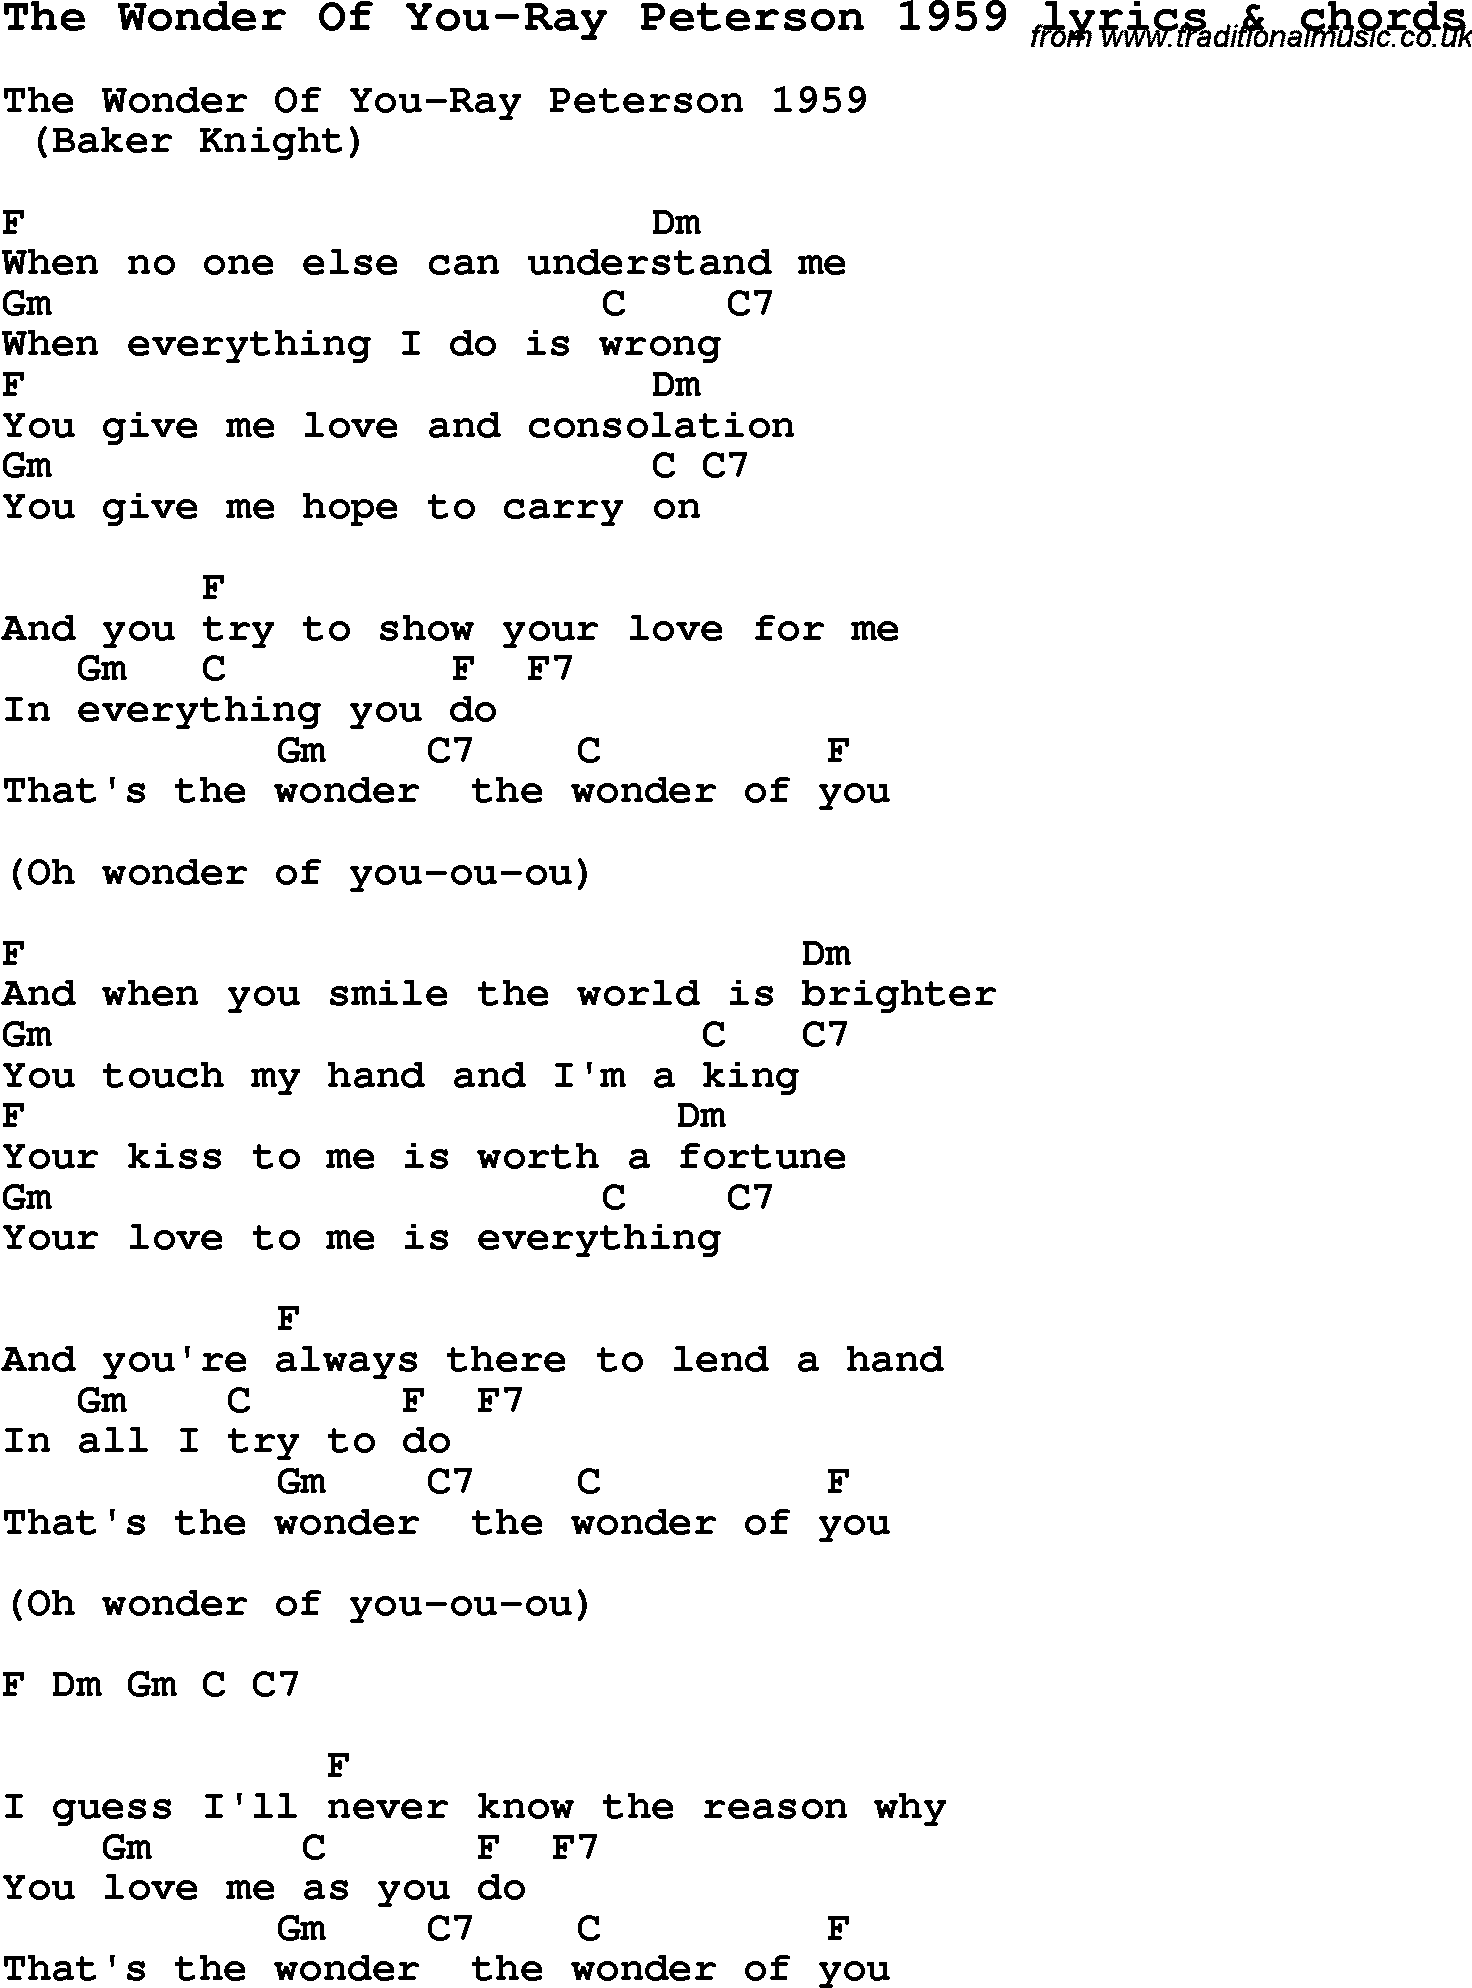 Love Song Lyrics for: The Wonder Of You-Ray Peterson 1959 with chords for Ukulele, Guitar Banjo etc.